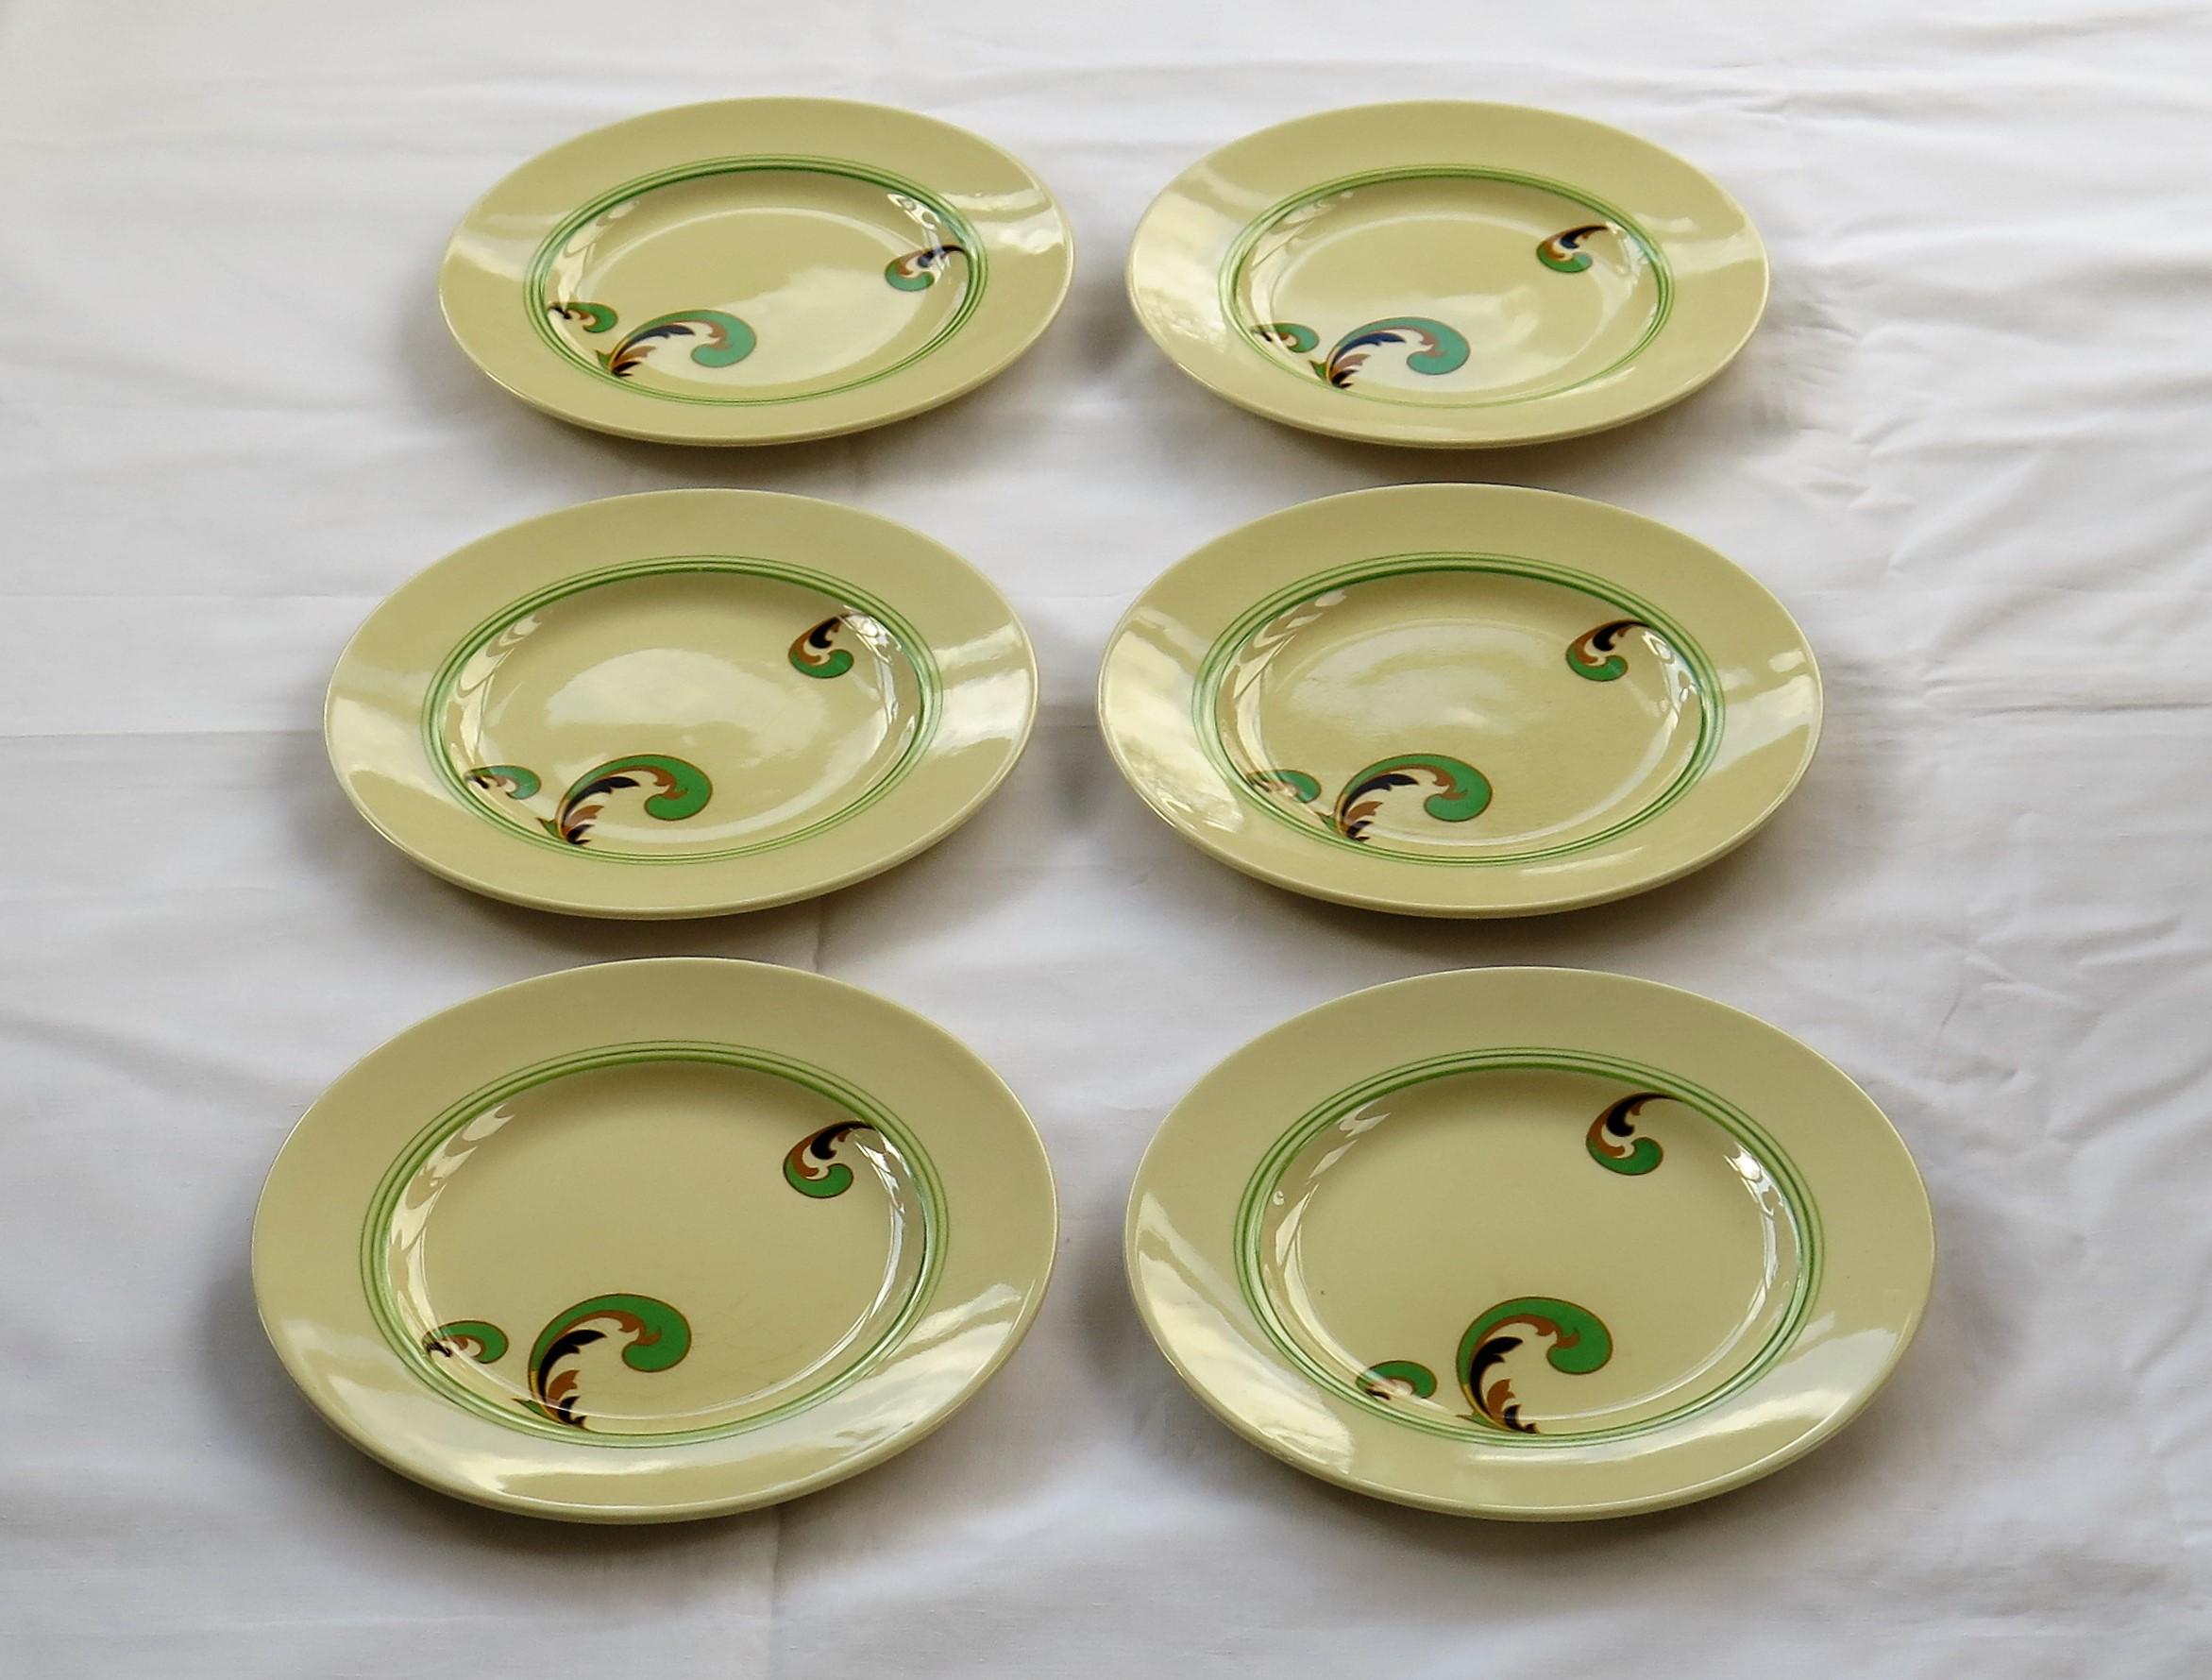 These are a good set of six side or salad plates decorated in the 